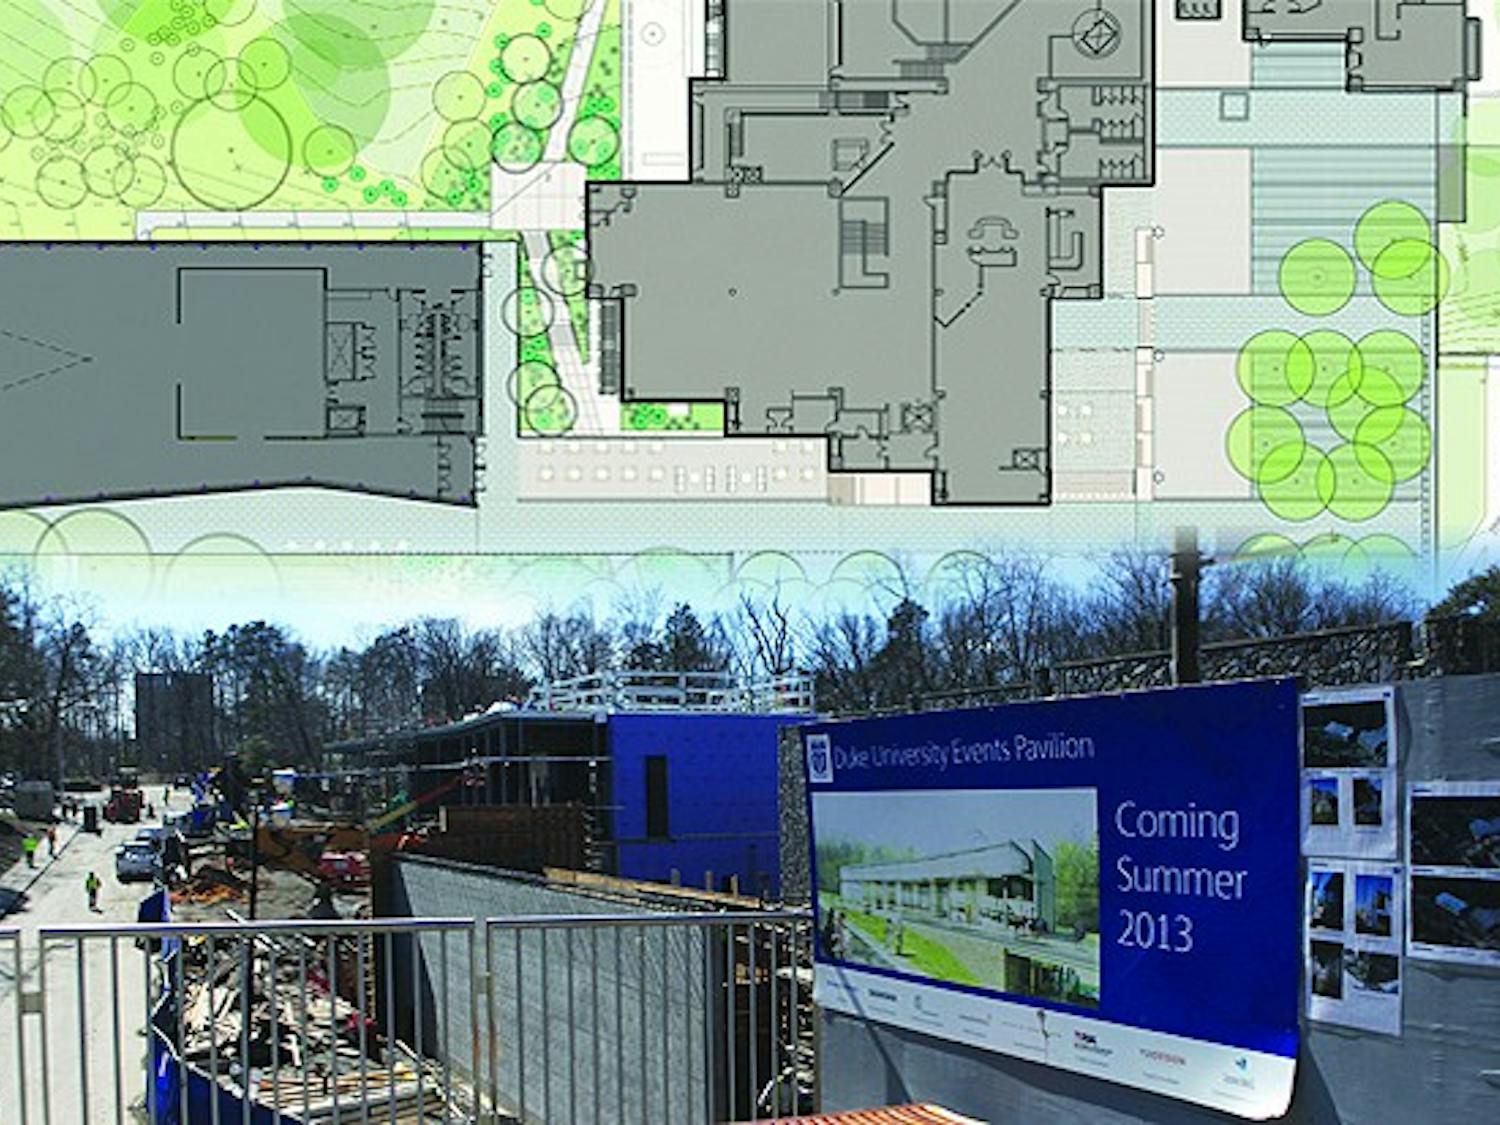 Plans show the extension of the Bryan Center Plaza to the new Events Pavilion (top), and the University moves forward with construction on the extended plaza and the Events Pavilion (bottom).